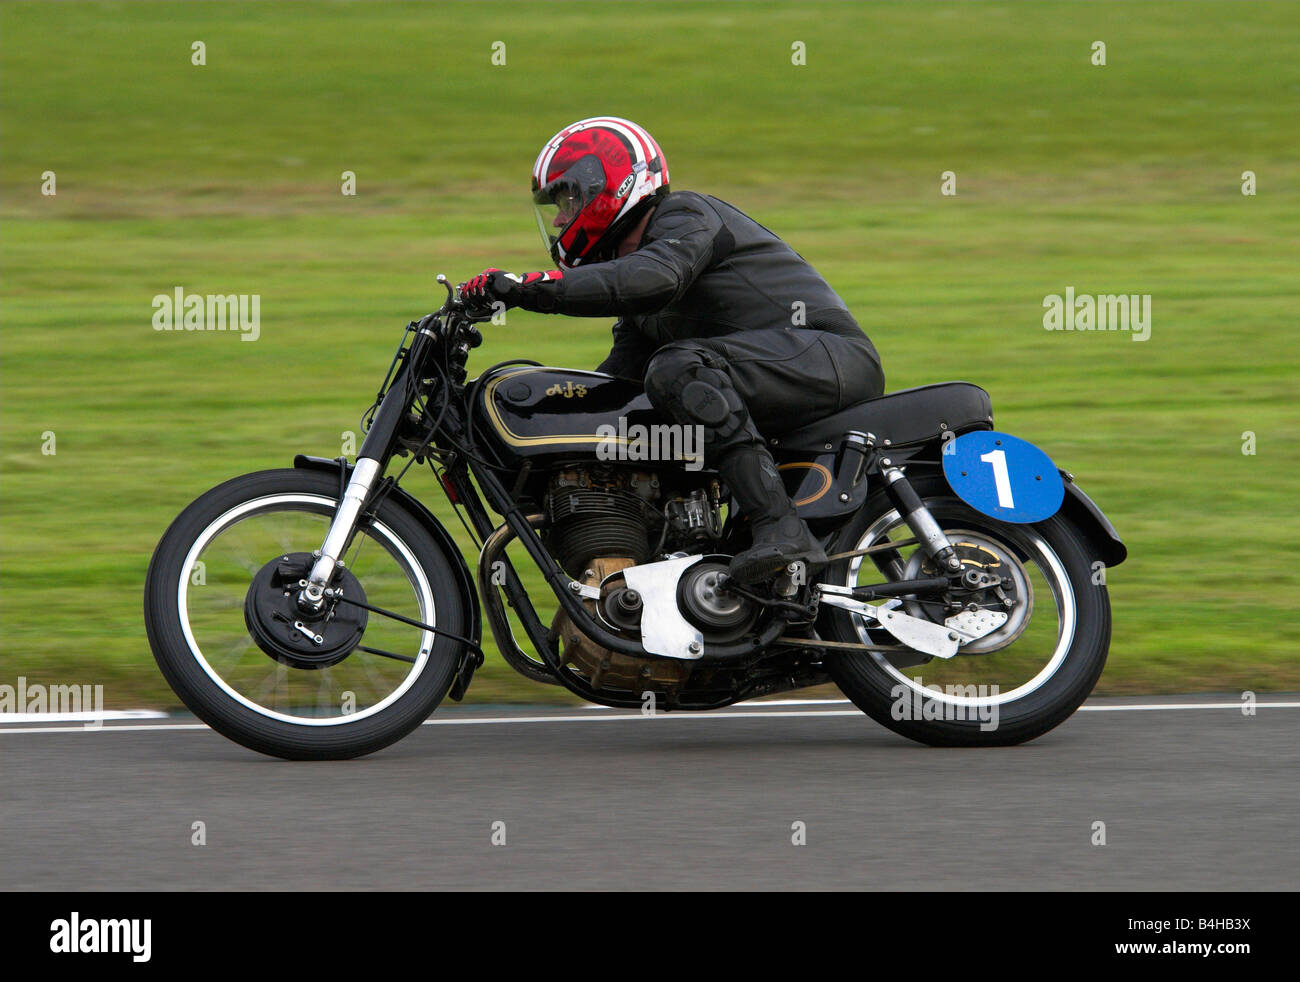 AJS 7R Classic Motorcycle Racing Stock Photo